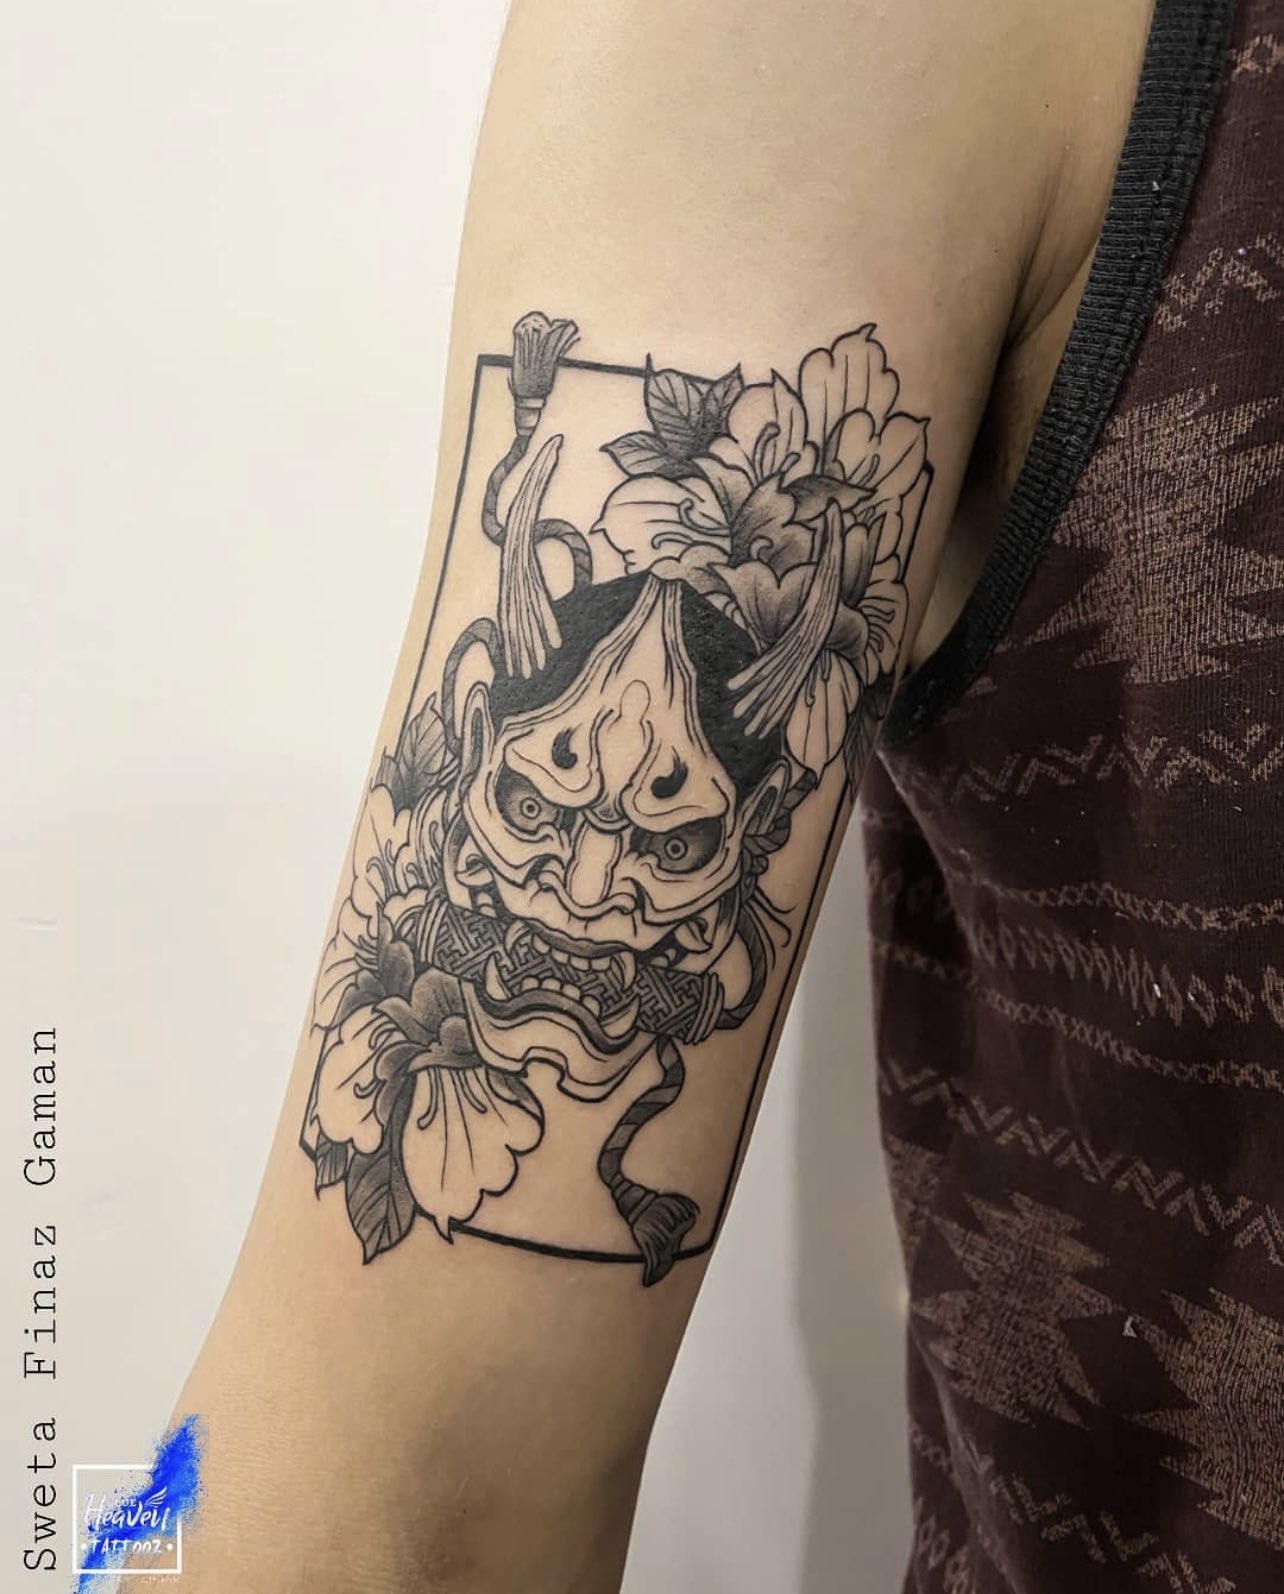 Hannya Mask Tattoo Design with Crown